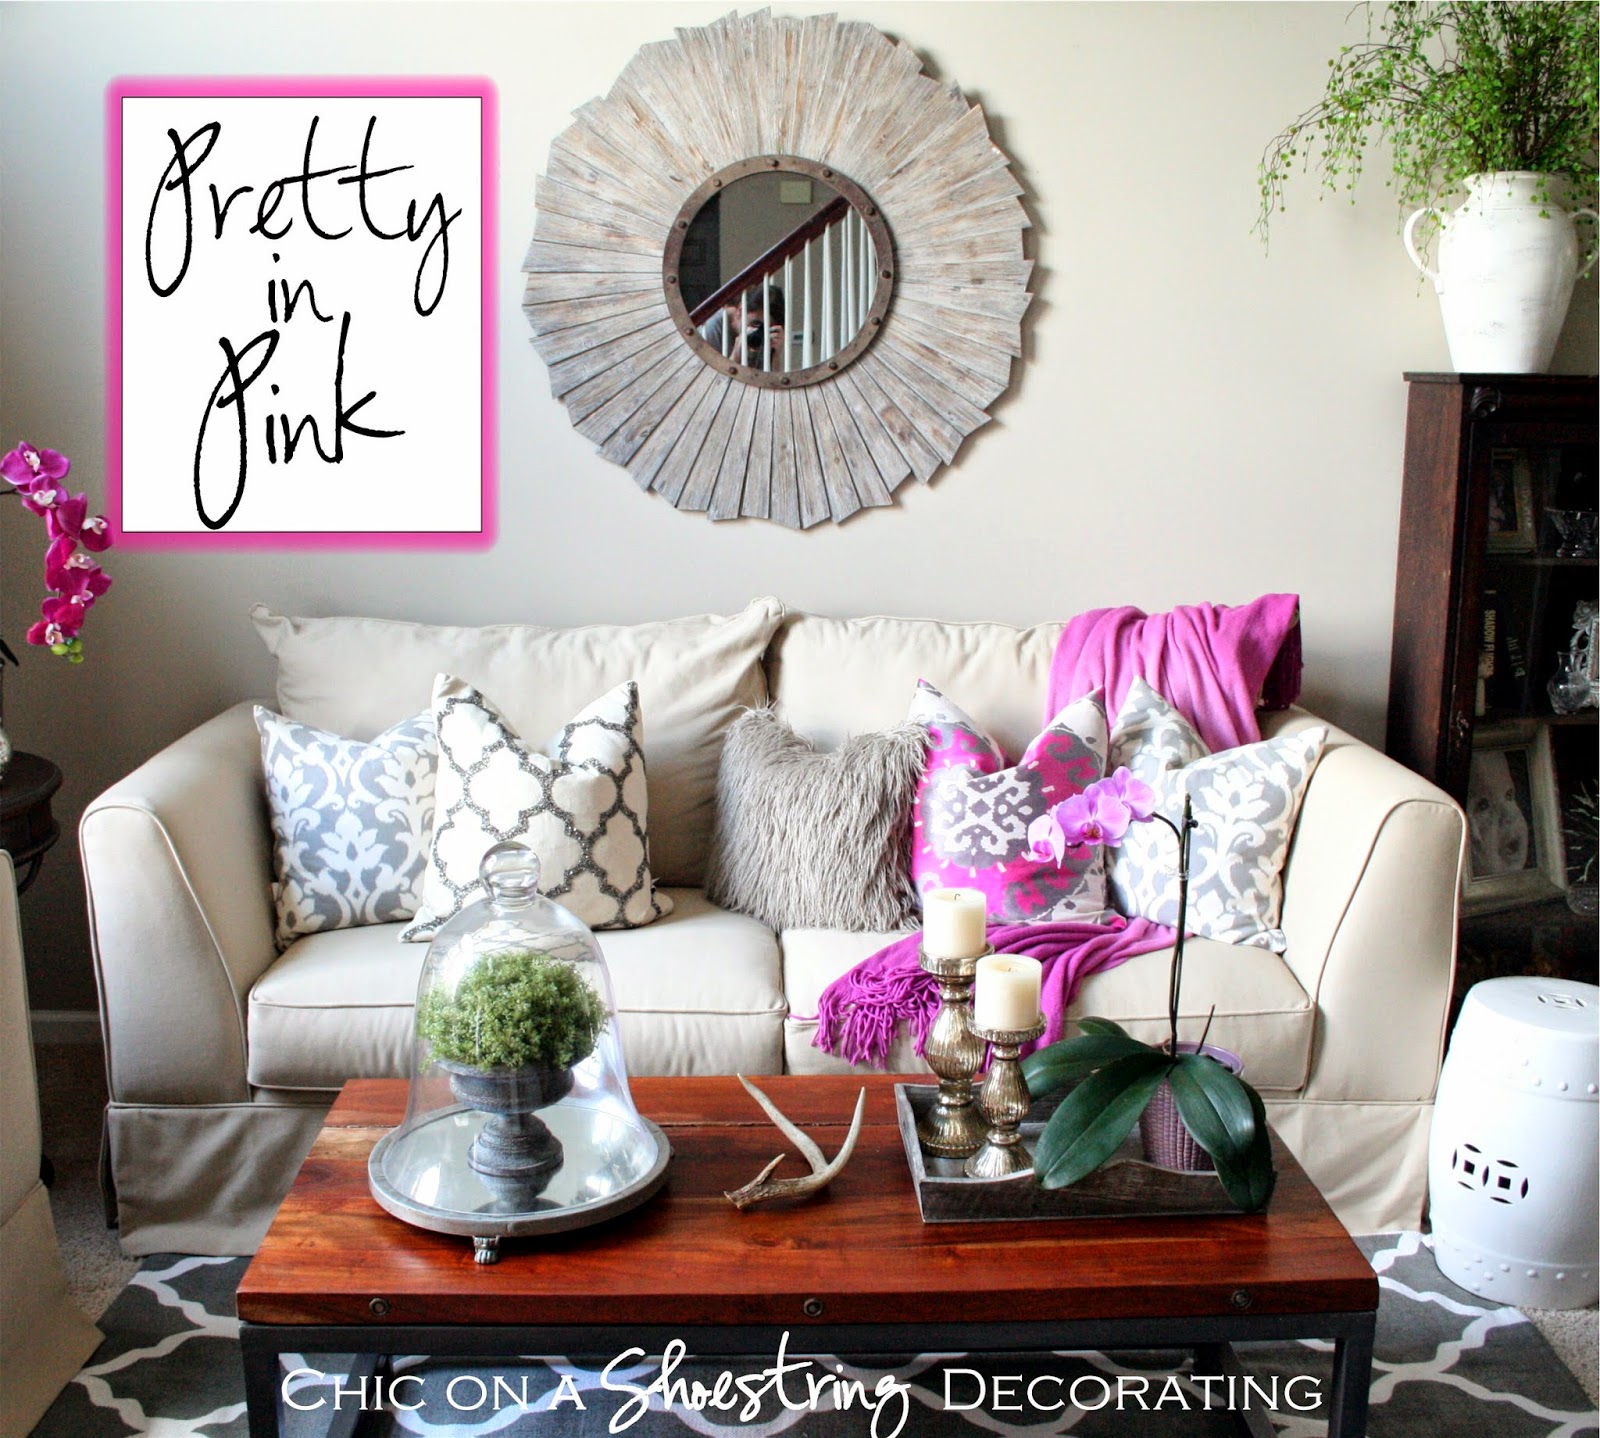 How To Achieve Luxury Interior Decor On A Shoestring Budget